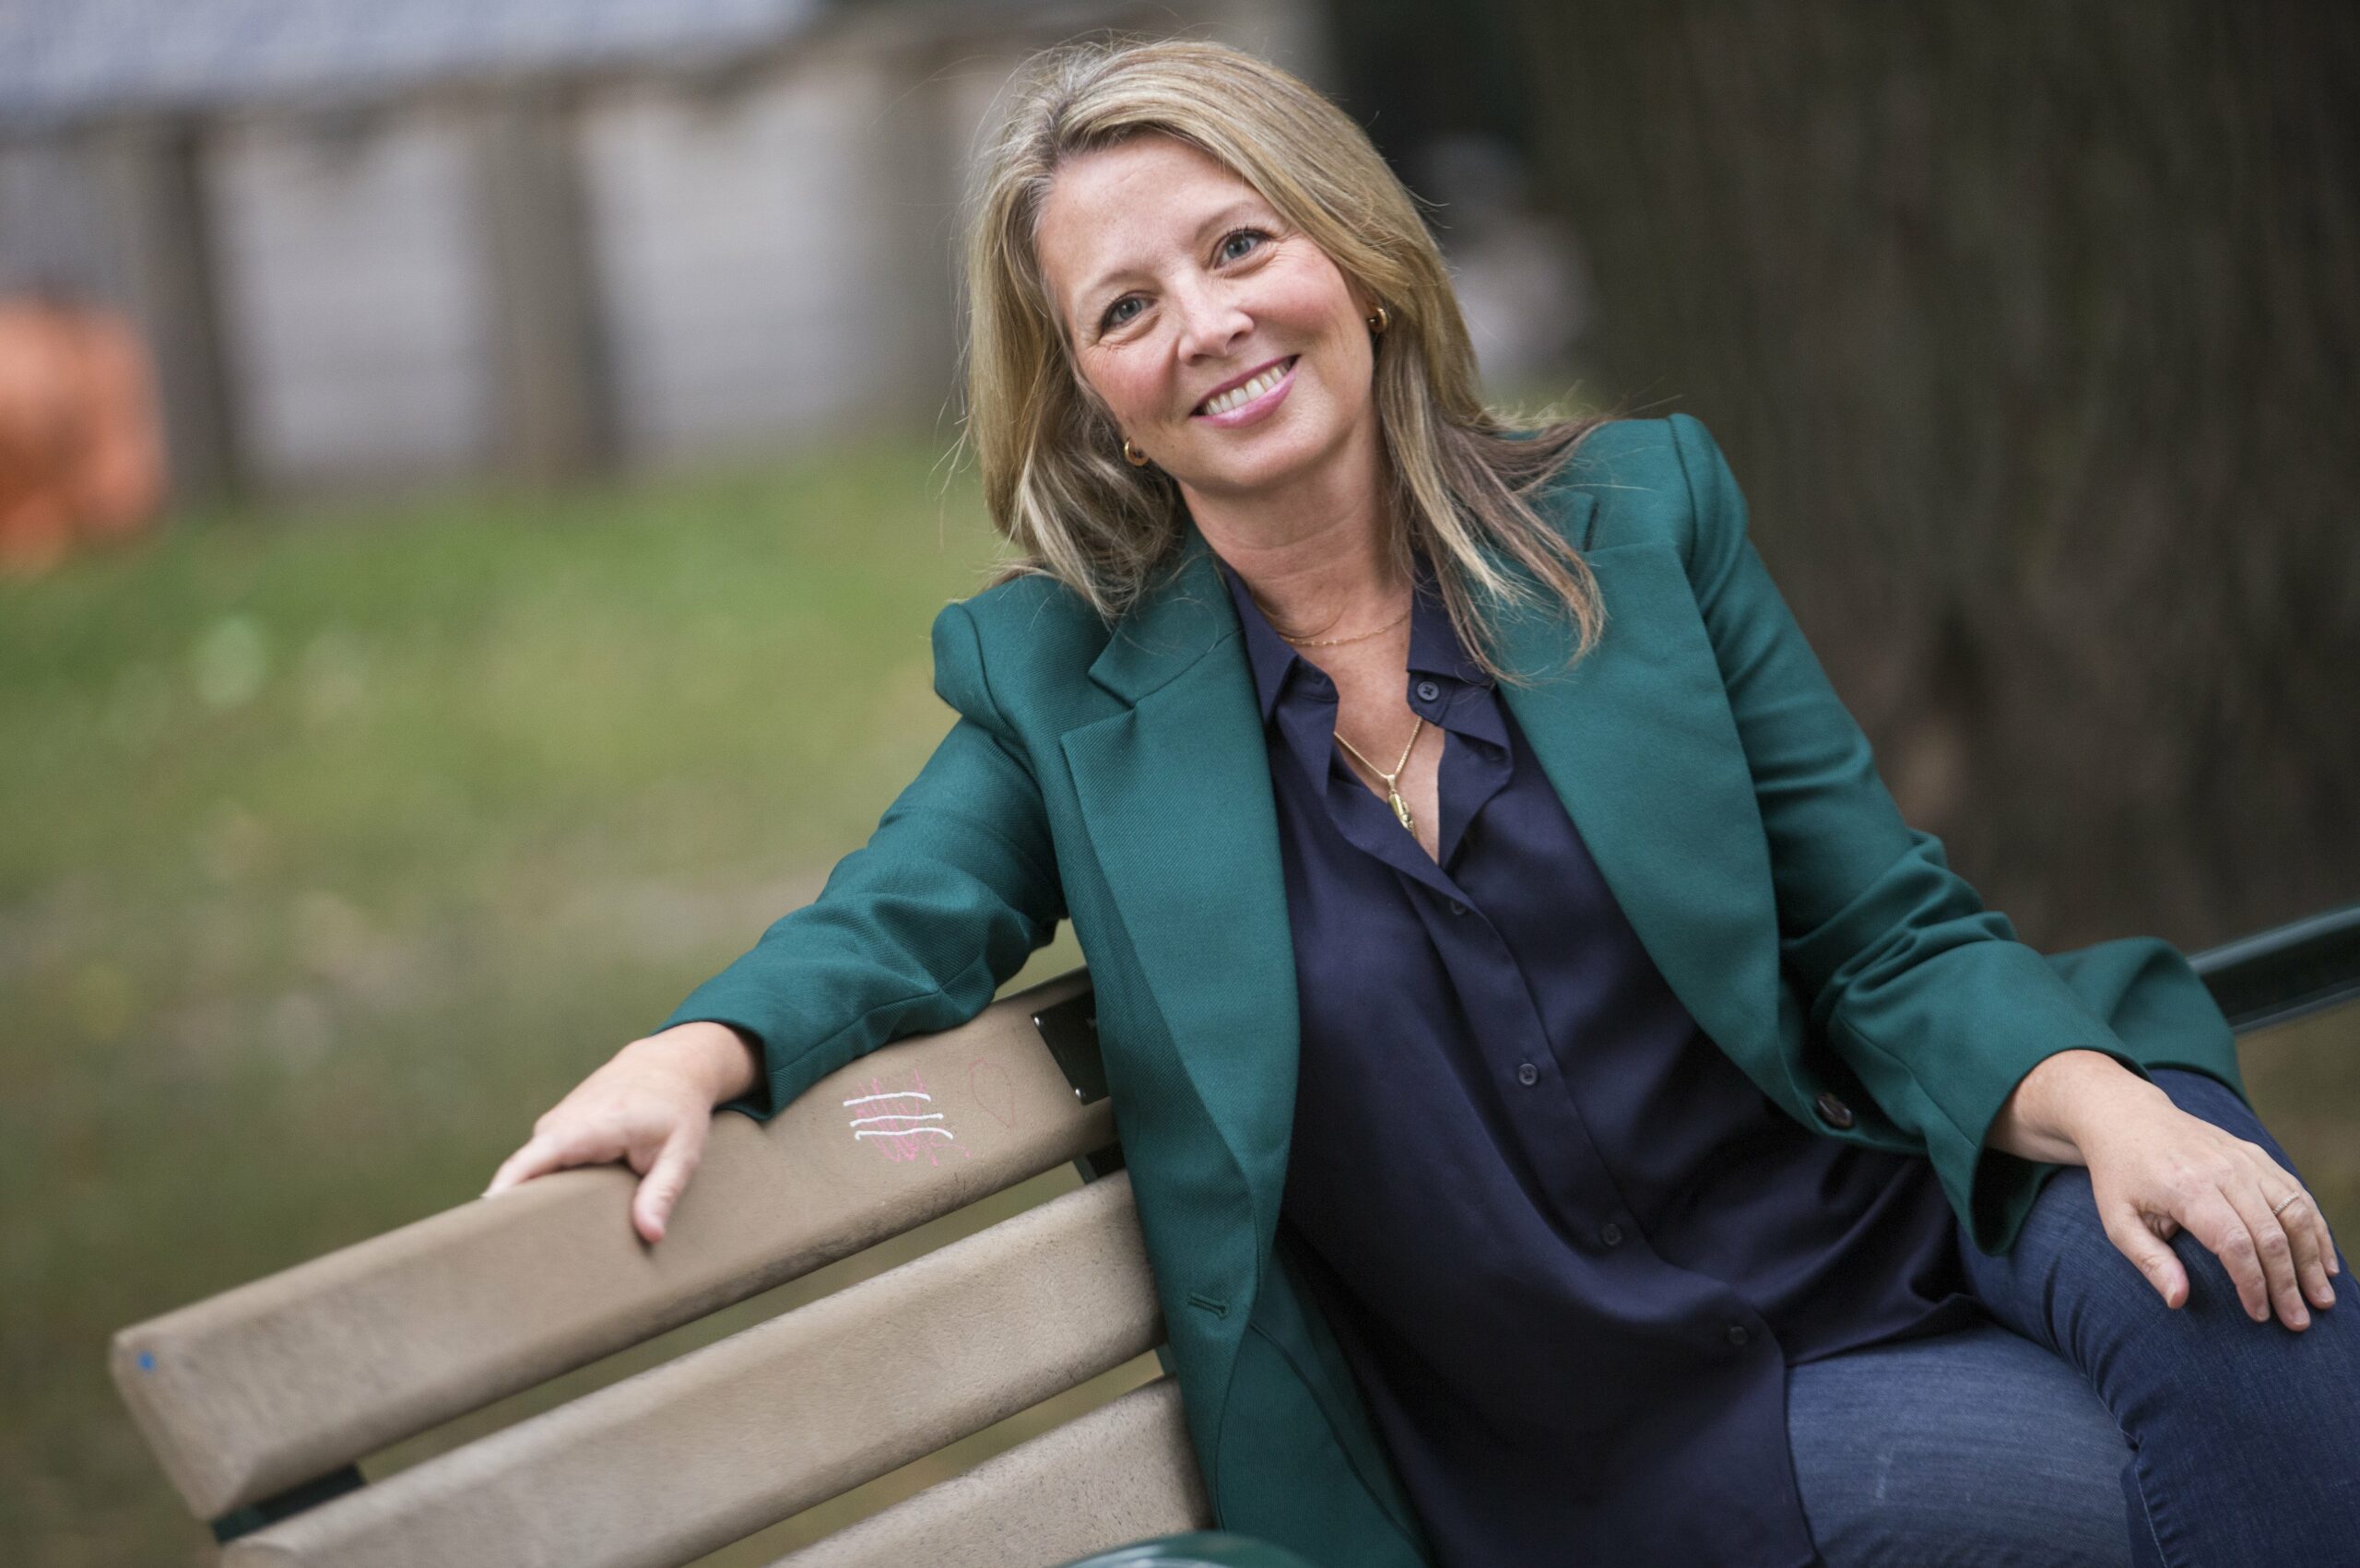 Marit Stiles casts herself as the Ontario NDP leader for everyone